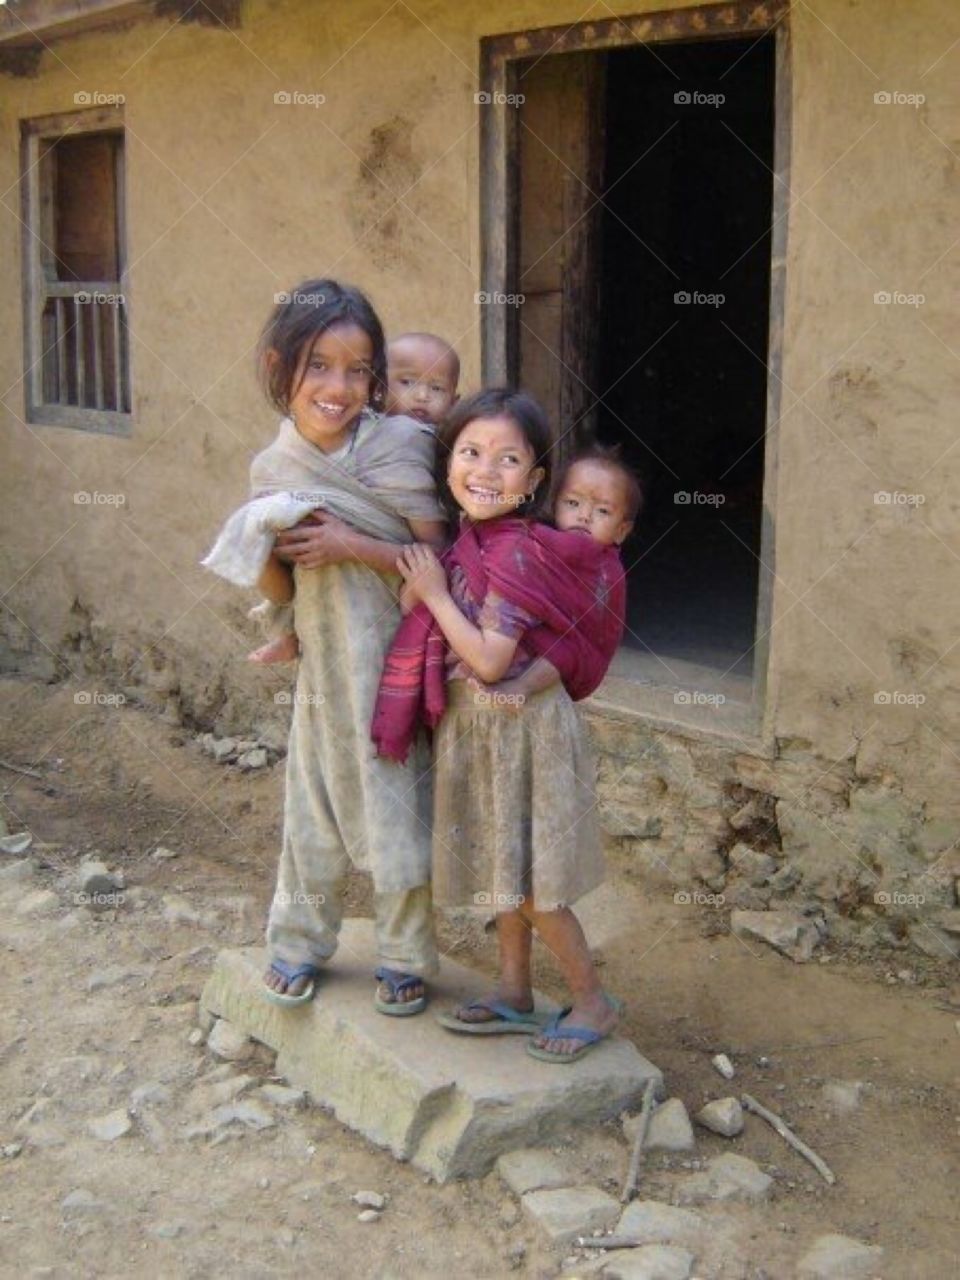 Life and times of Nepal children